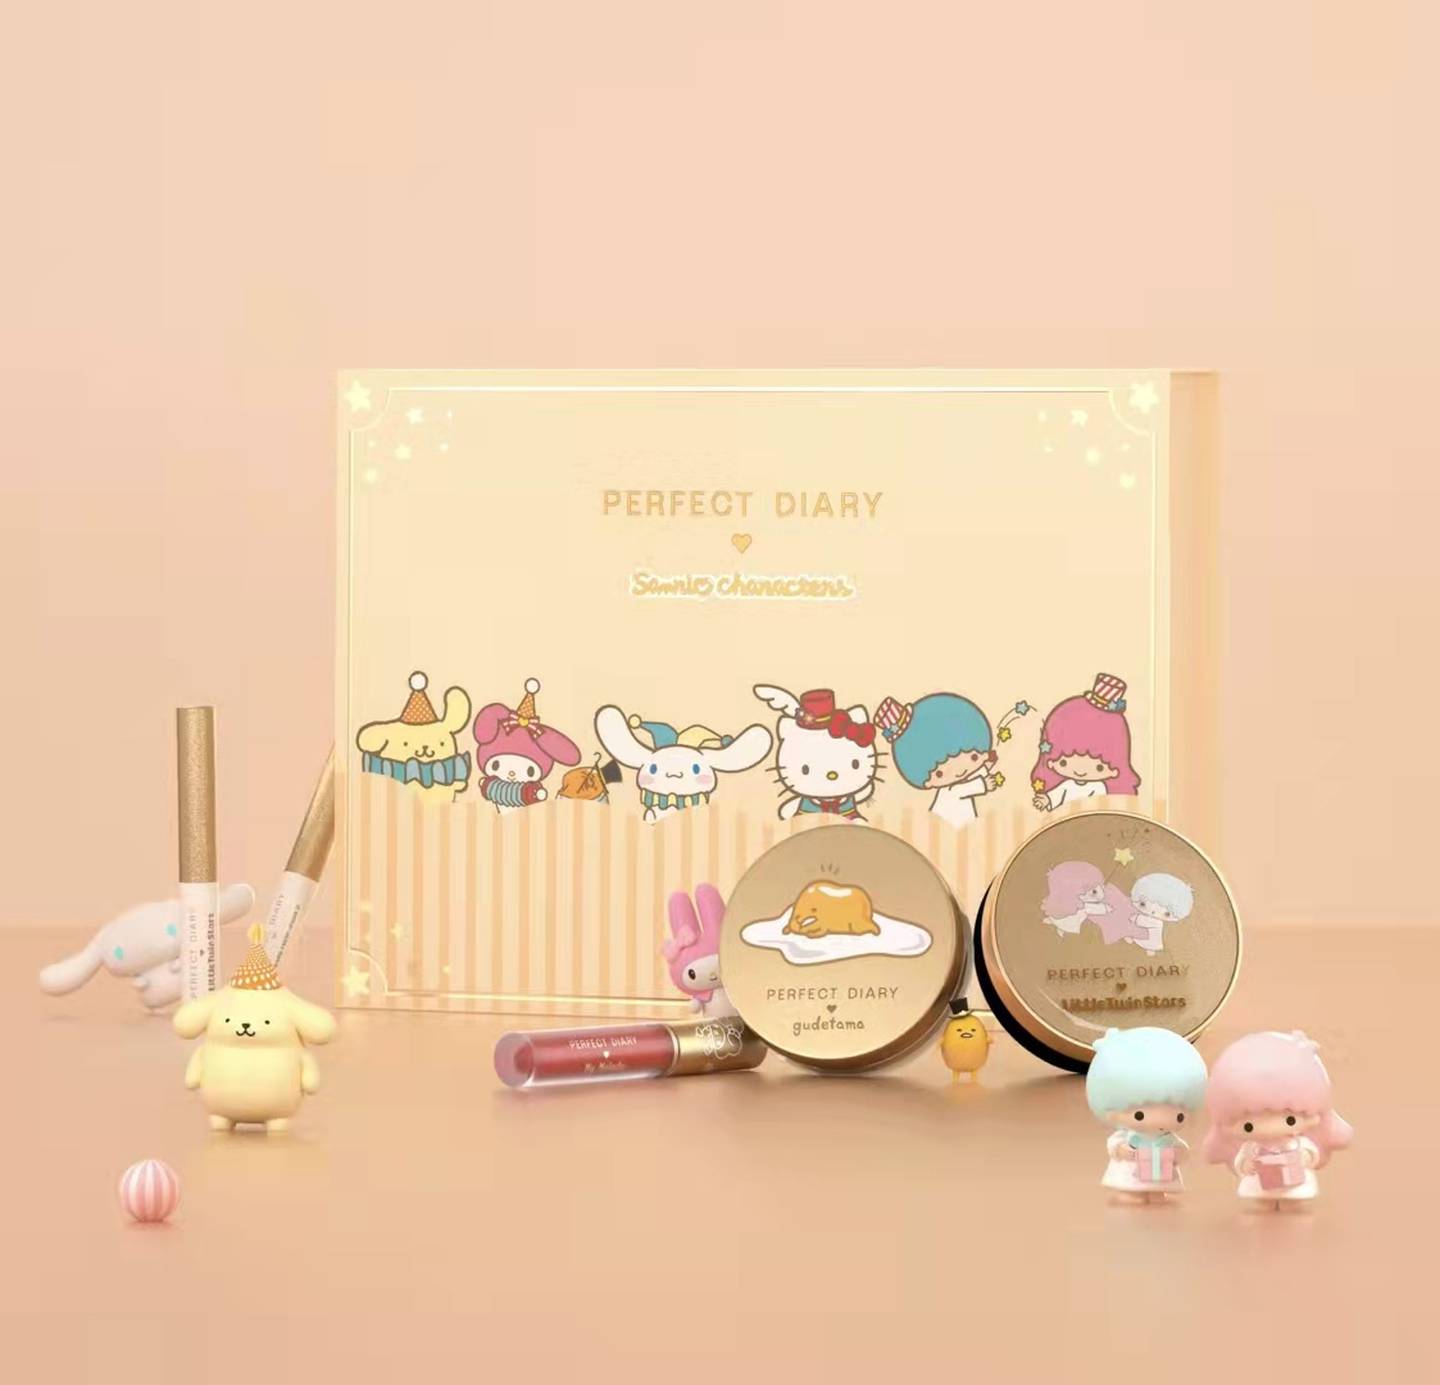 Perfect Diary's collaboration with Sanrio, the company behind Hello Kitty, which proved popular in the Southeast Asian market.